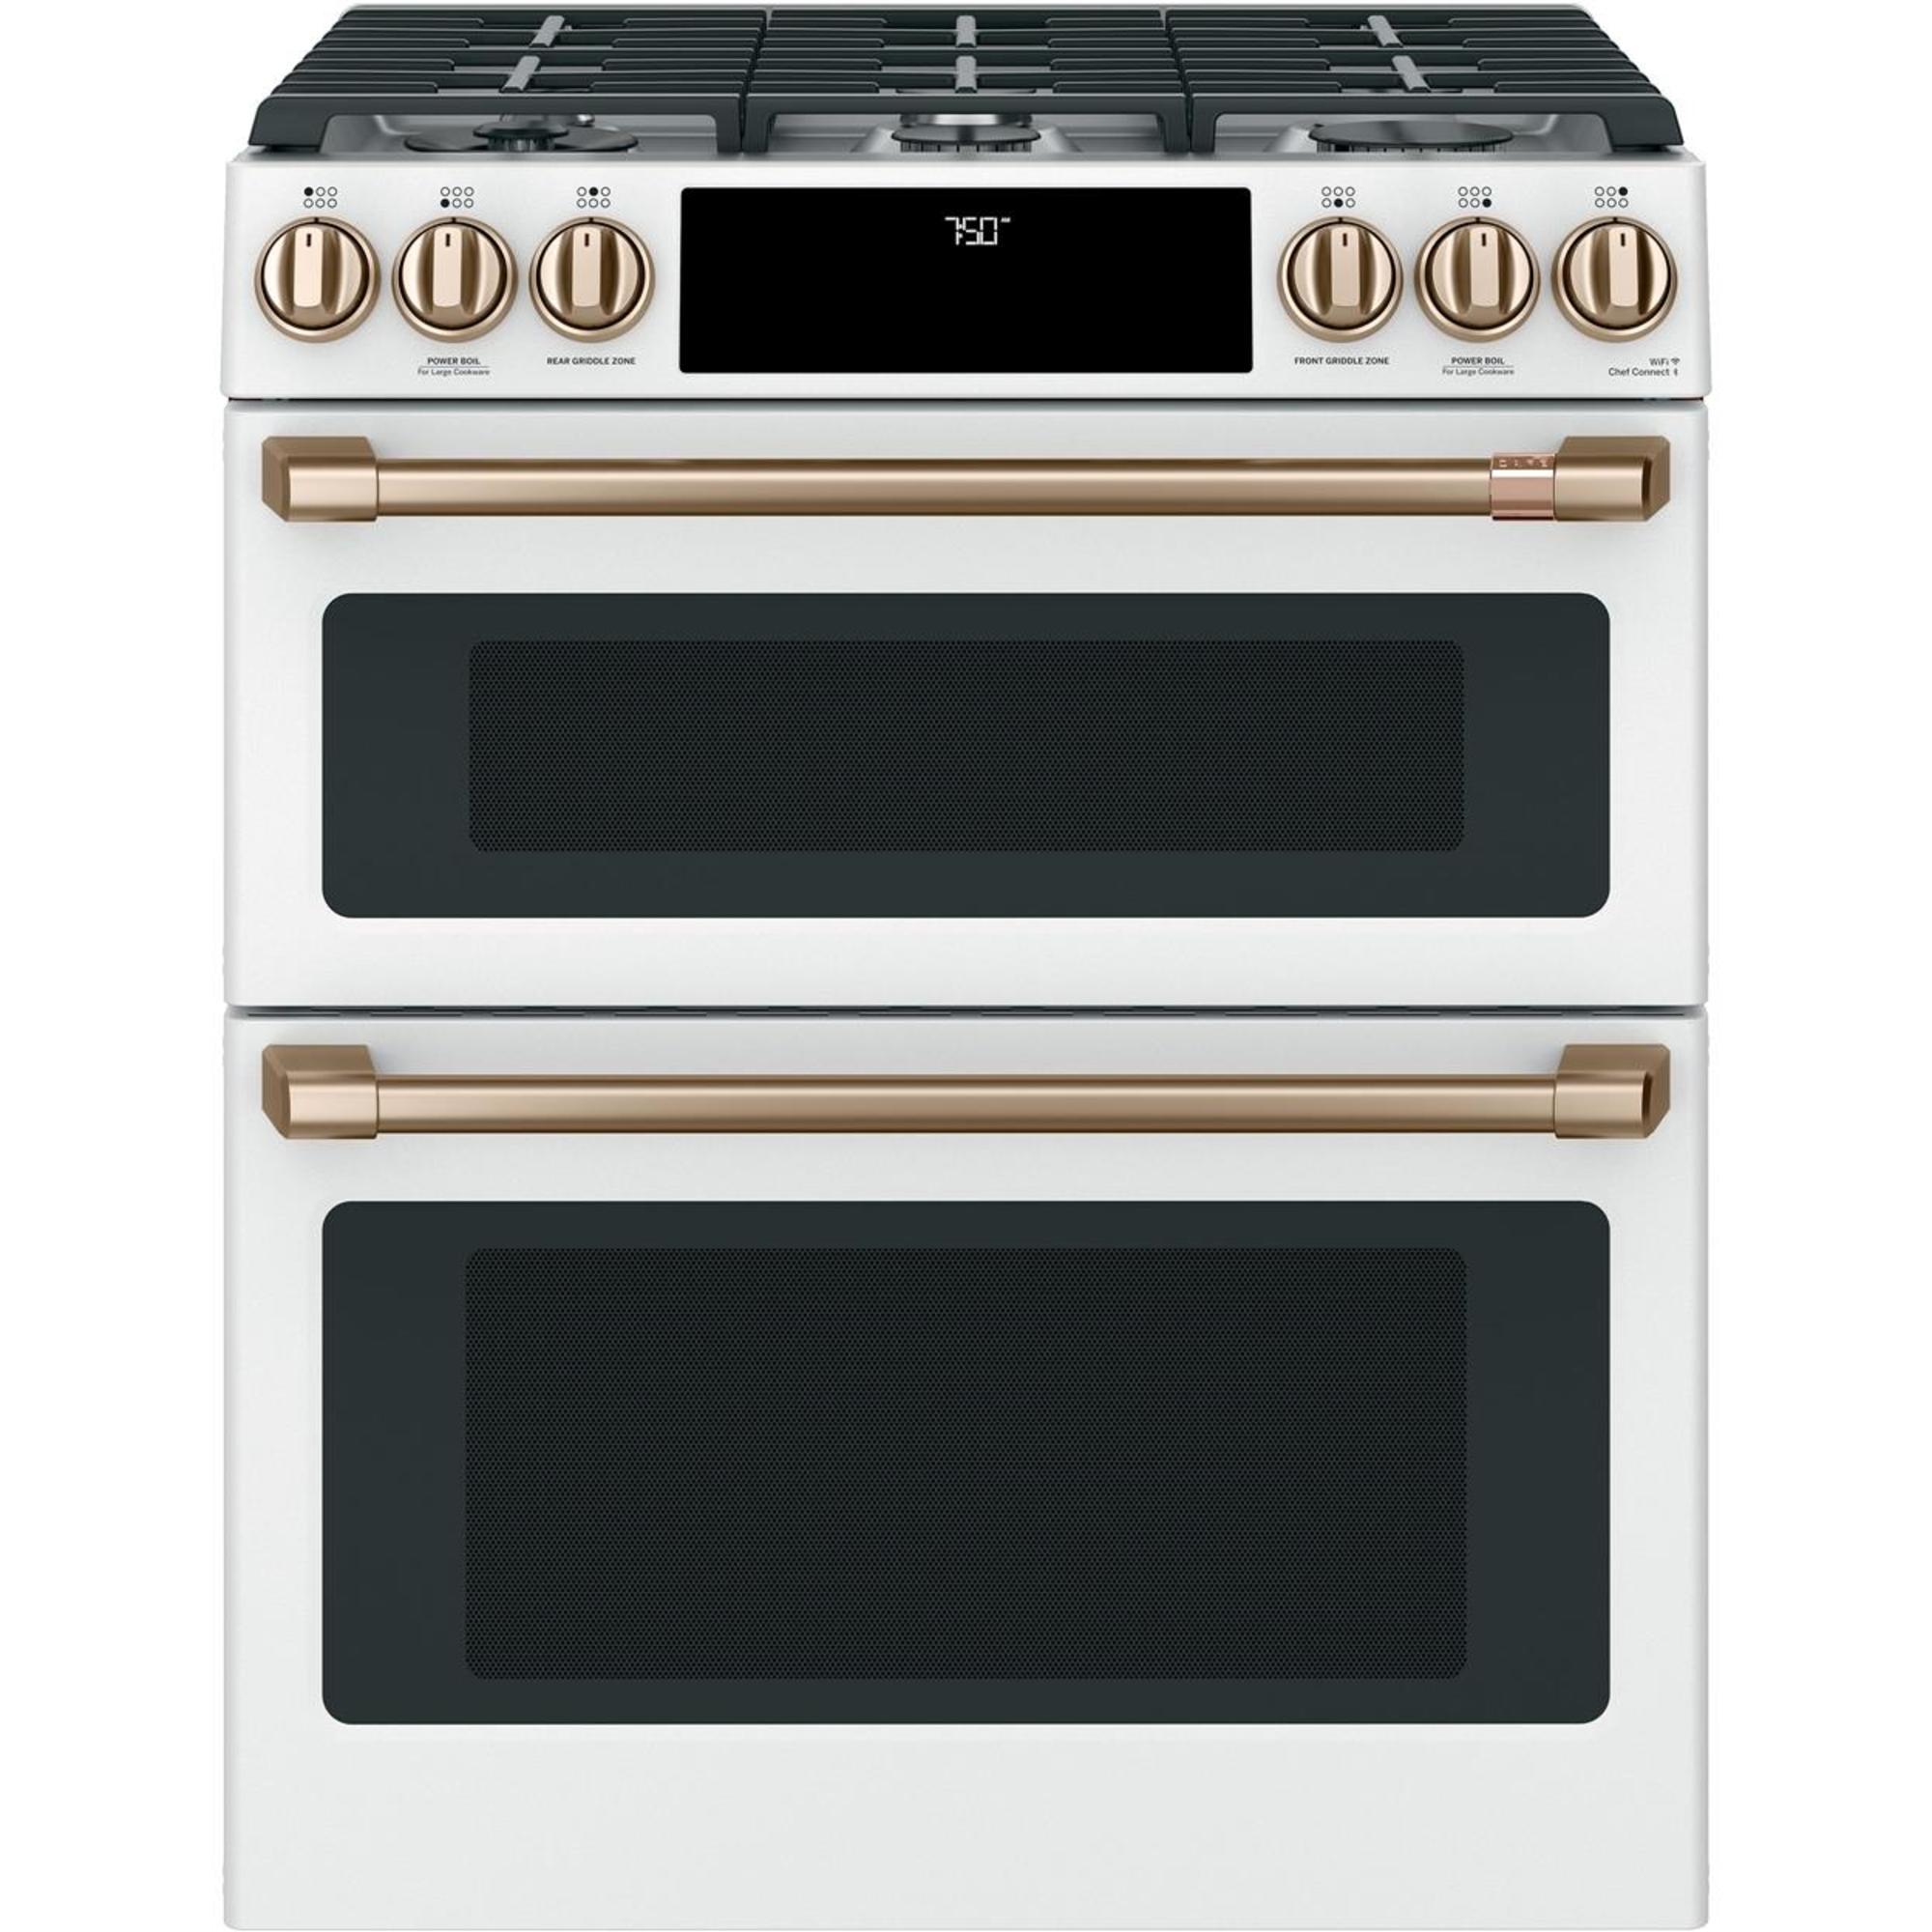 Cafe Café CGS750P4MW2 30" Slide-In Gas Double Oven with Convection Range - Matte White